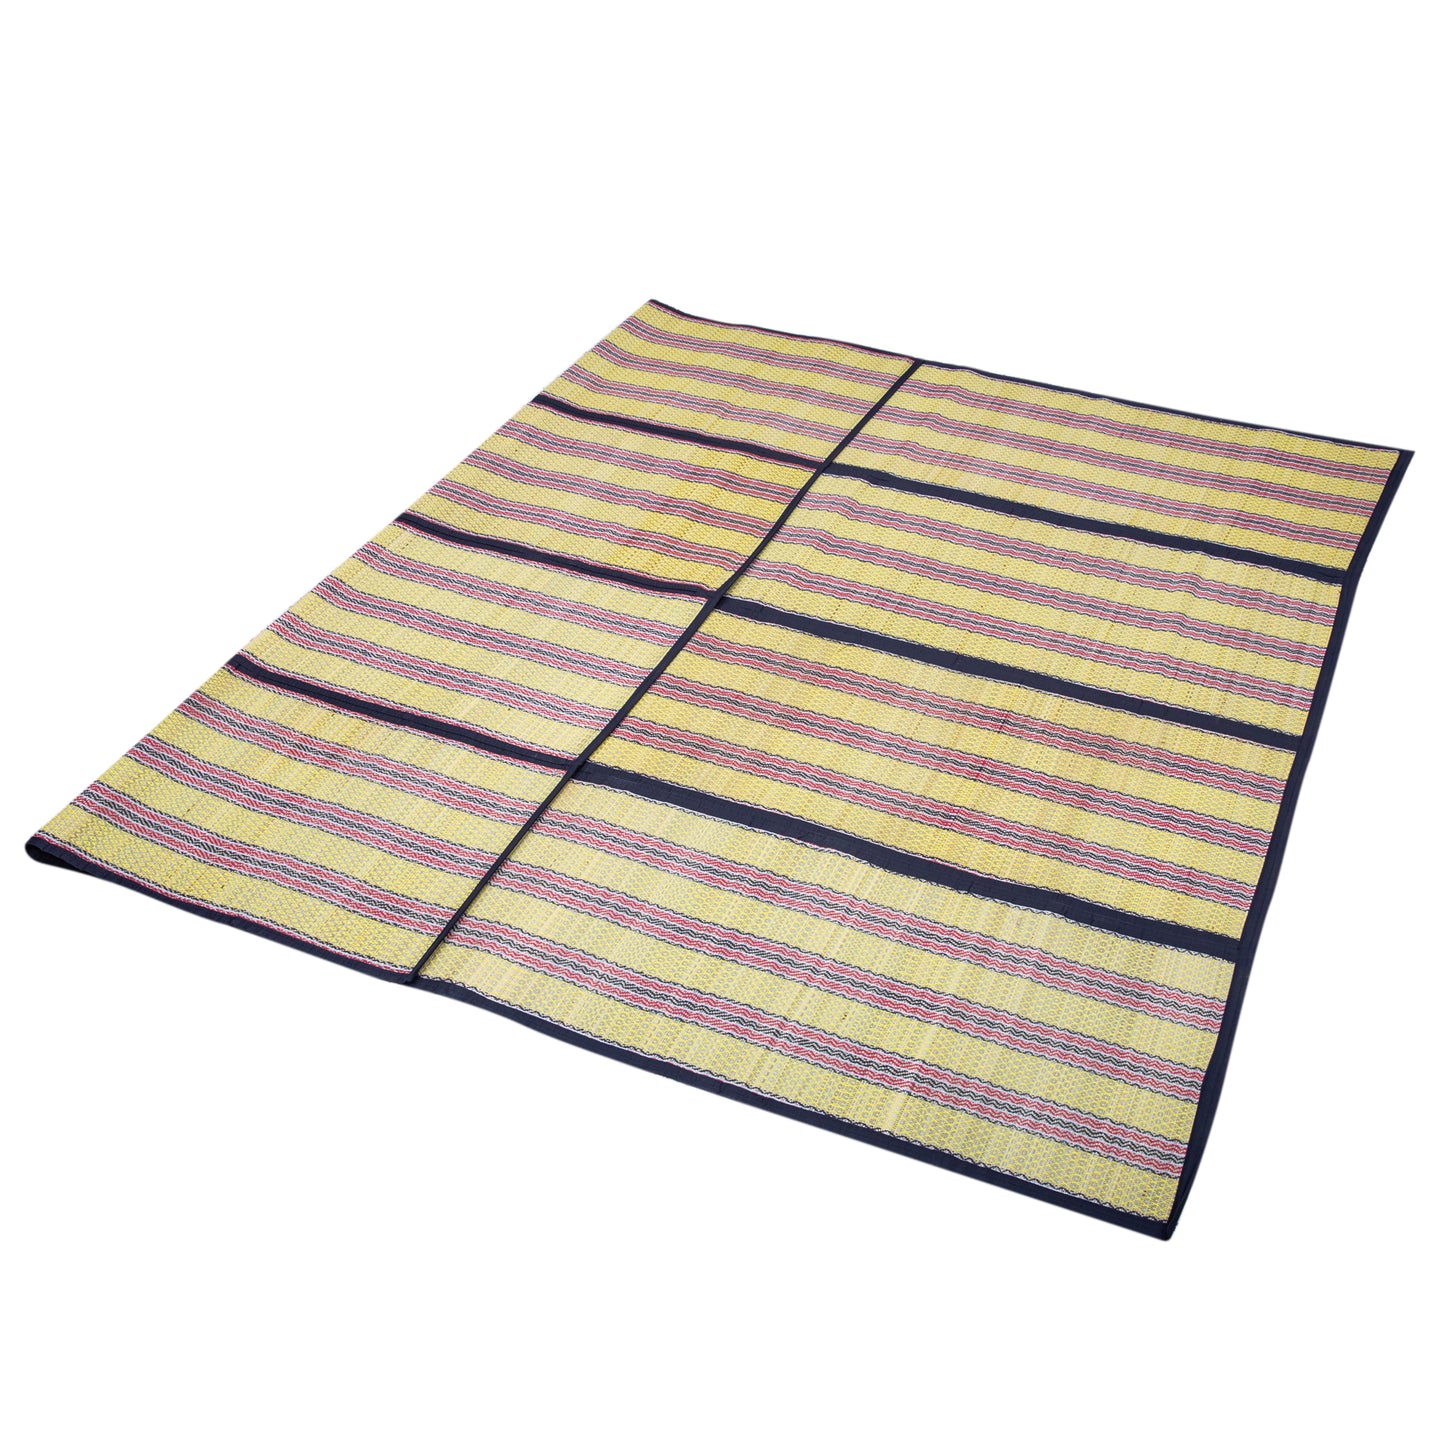 Chatai Mat Foldable handwoven Organic made of Madurkathi Grass for Sleeping, Sitting on Floor - T3-40